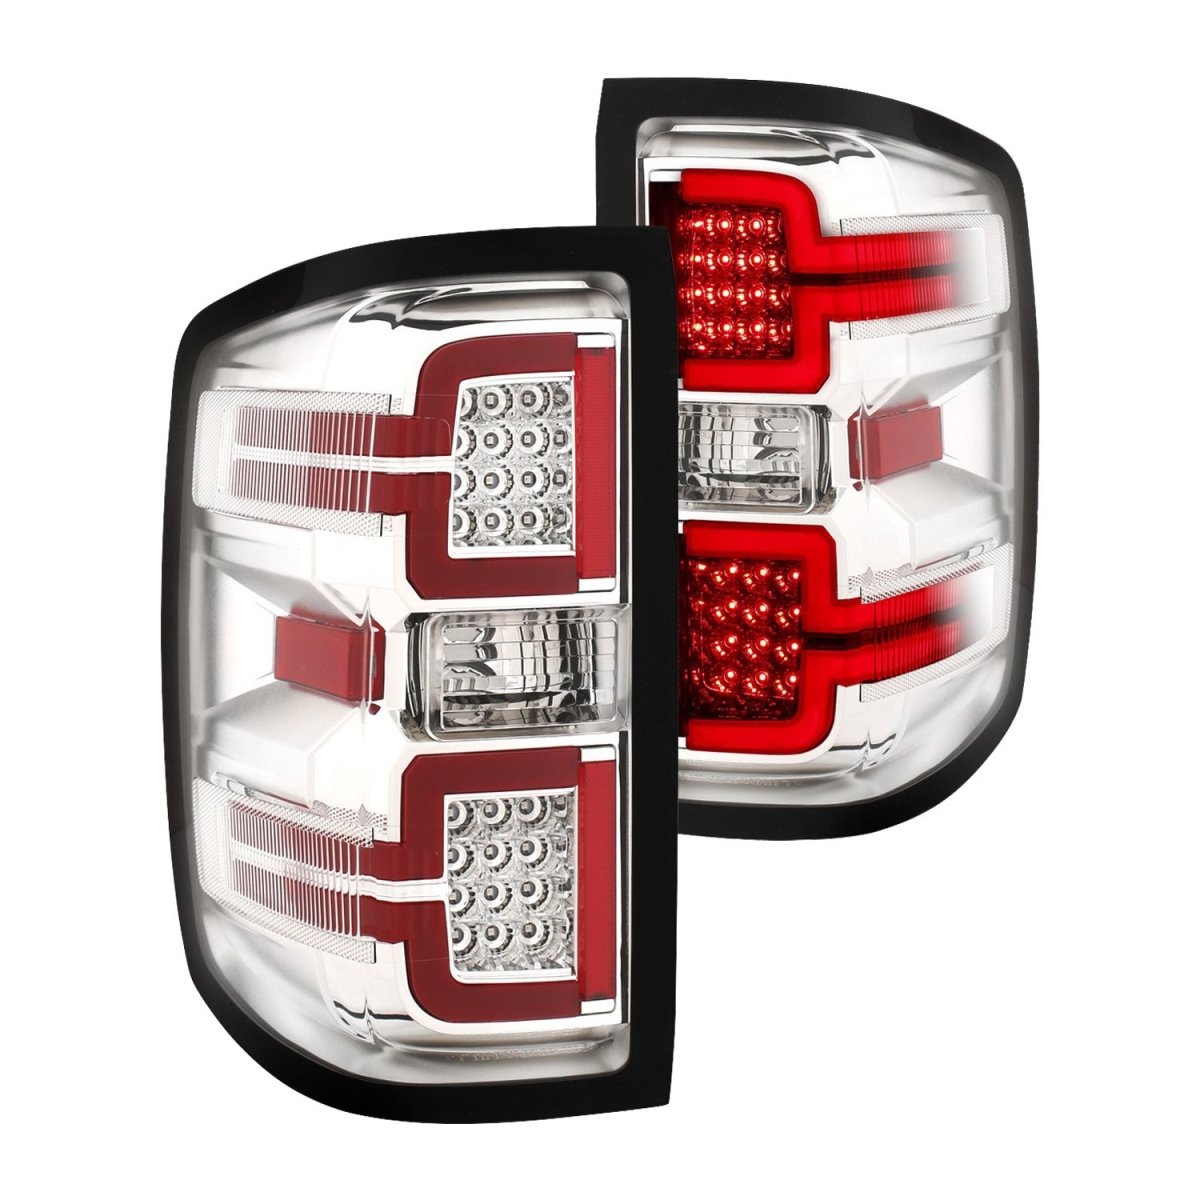 311291 Sequential Fiber Optic Led Tail Light For 2014-2019 Chevy Silverad0 1500 & 3500 - Chrome